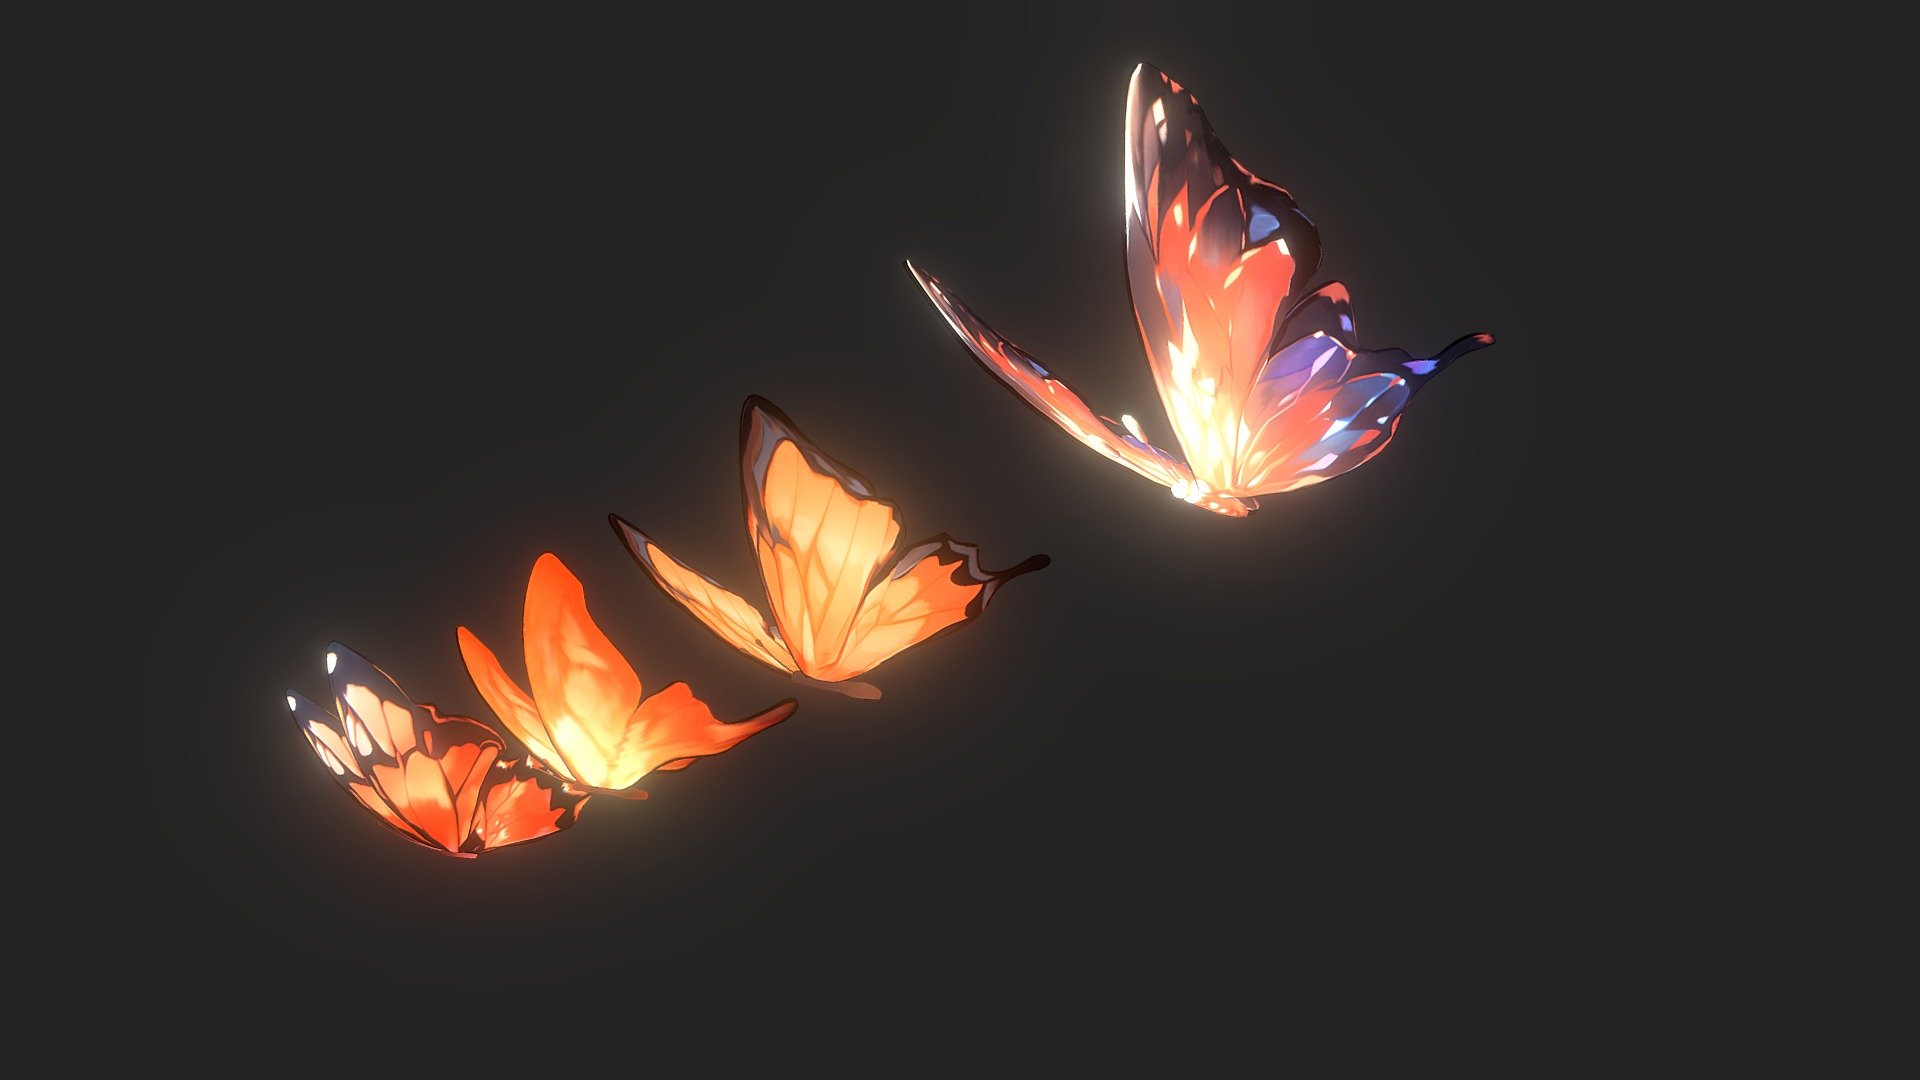 Insects

File




Blender 3.3 (rigged)

USDz (No Rigged)

FBX (rigged) 

OBJ (No Rigged)

GLTF (rigged) 

4 Different butterfly models

4 Materials

4 Textures - 4k.jpeg (Texture Color)

Unit system is set to metric(cm). The dimensions are real

Video : https://youtu.be/lmoqYF6zFIw

If you need any help with the model, do not hesitate to contact us so that we can give you support 3d model